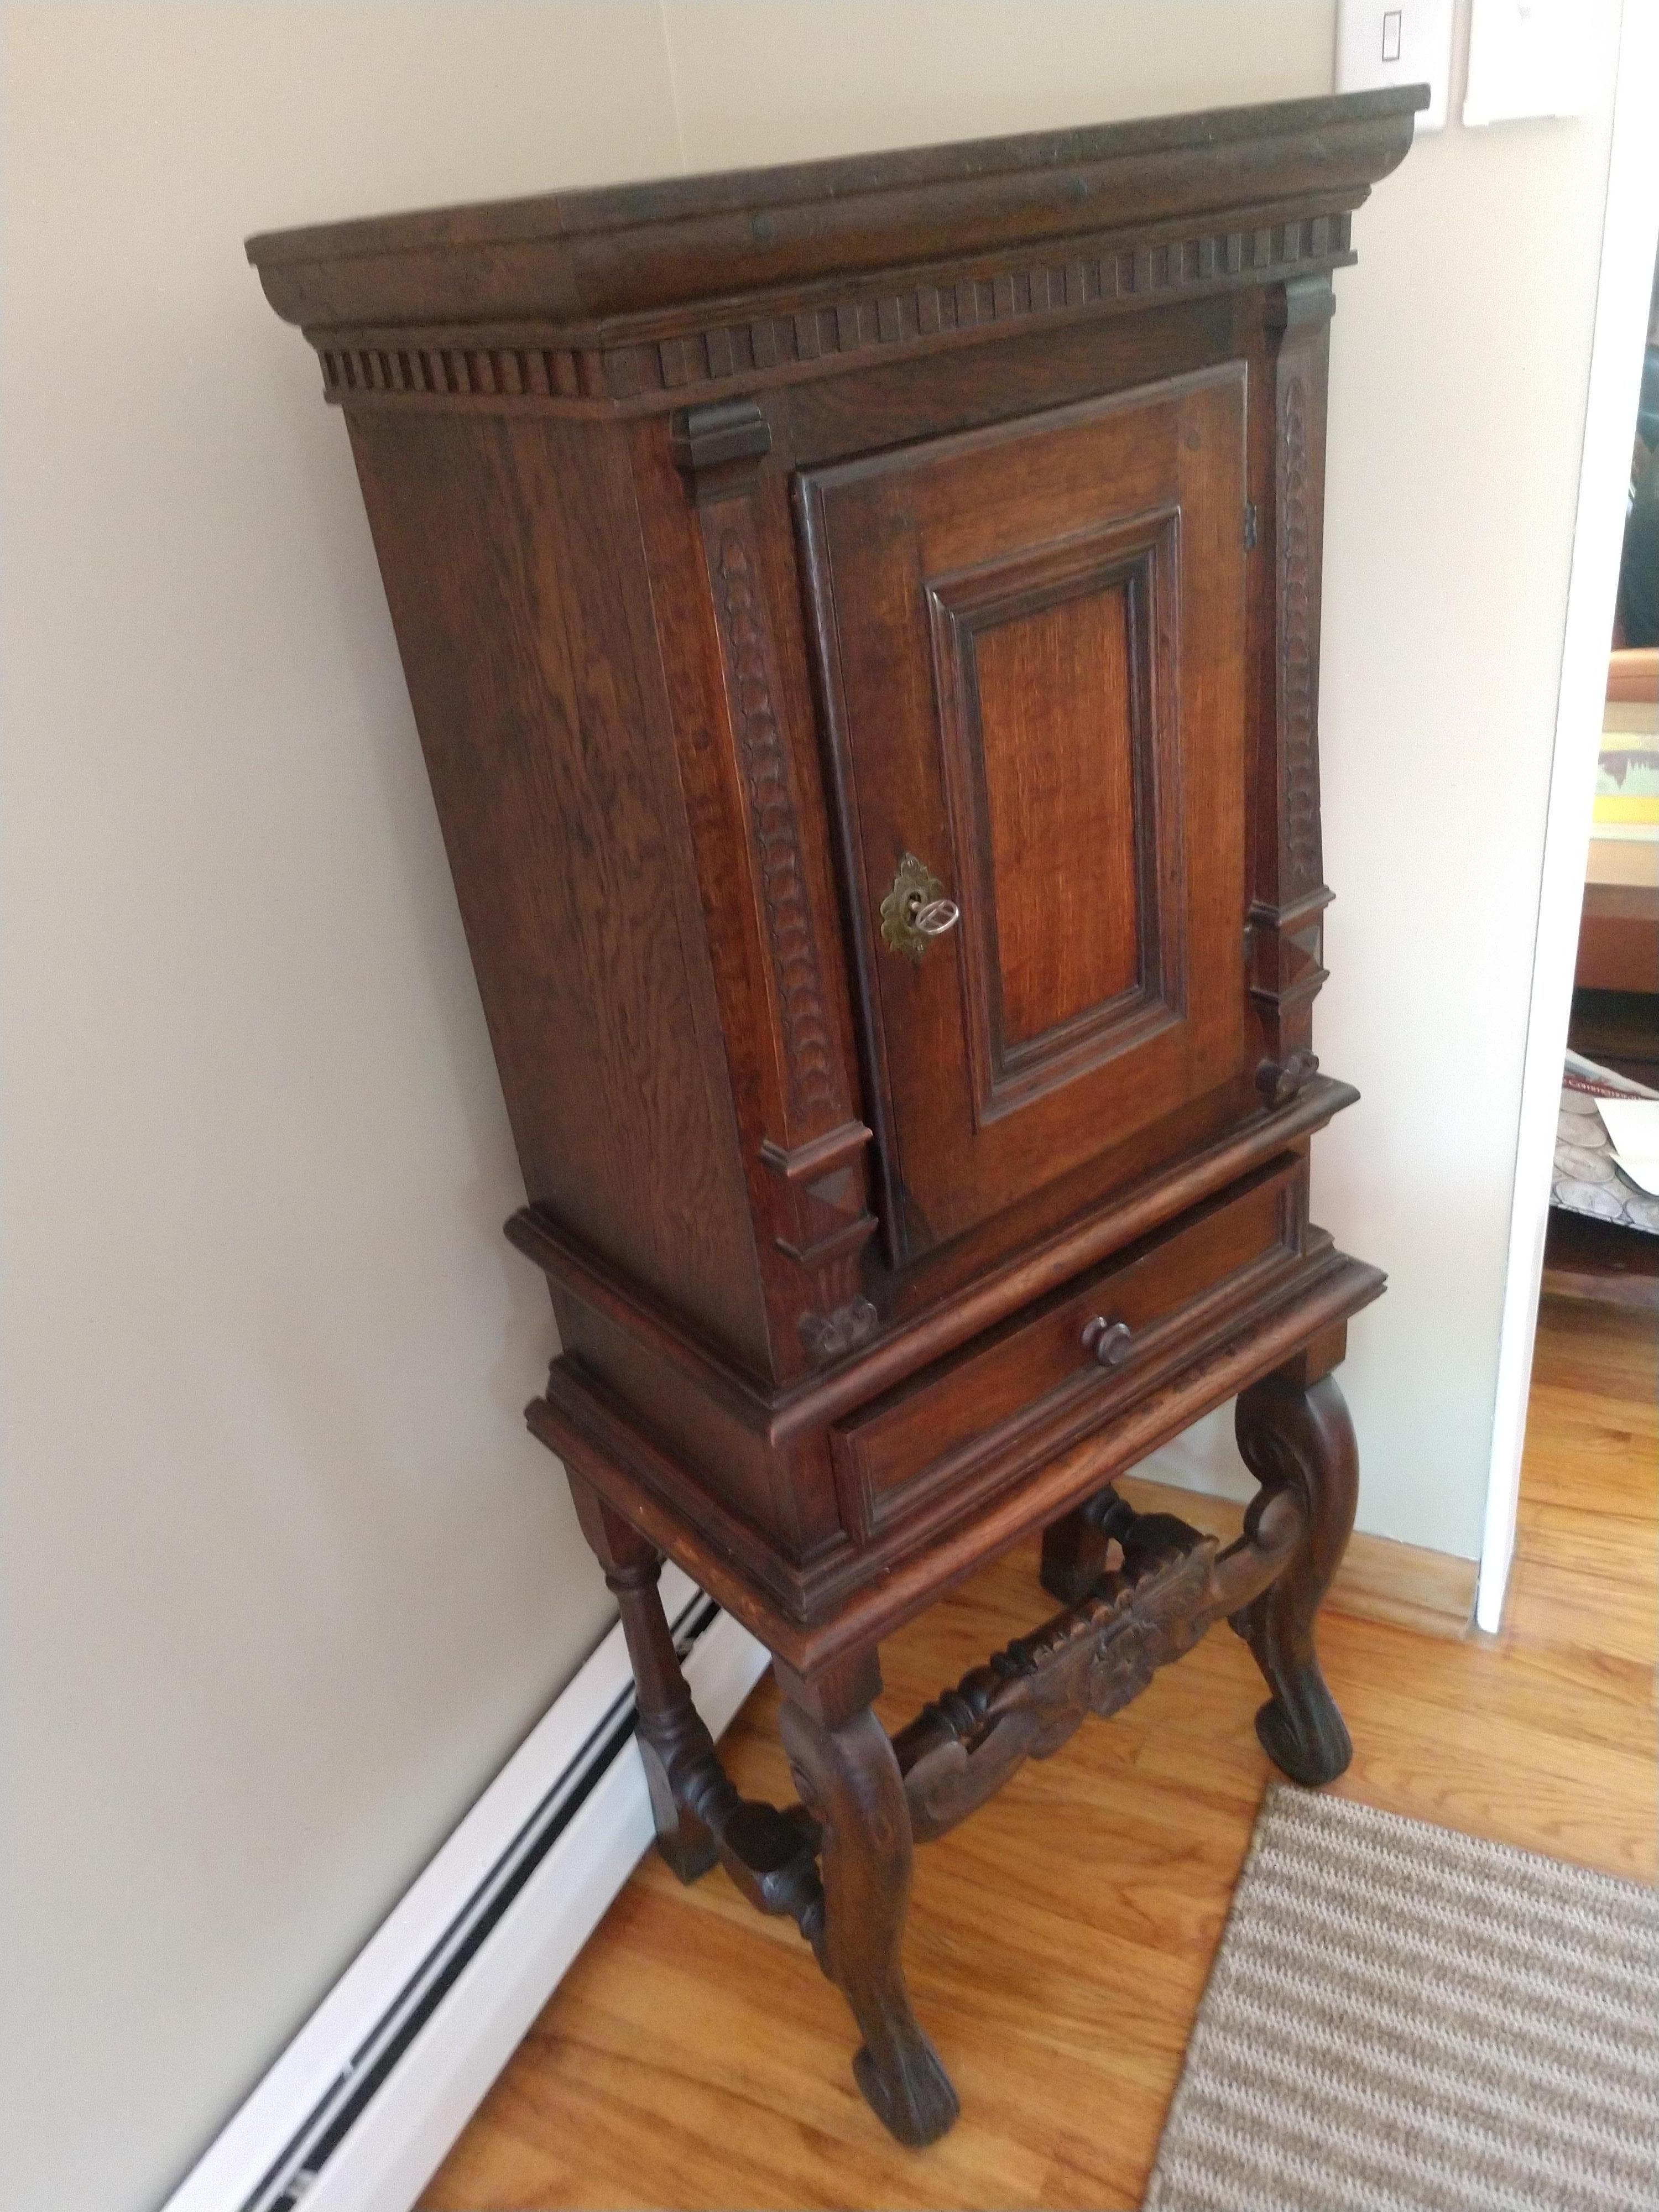 Hand crafted cabinet on a carved base with storage compartment up top. Created out of beautiful walnut, cabinet can serve many uses and functions today. Would work well in the bath or an office and dining room. In excellent vintage condition with